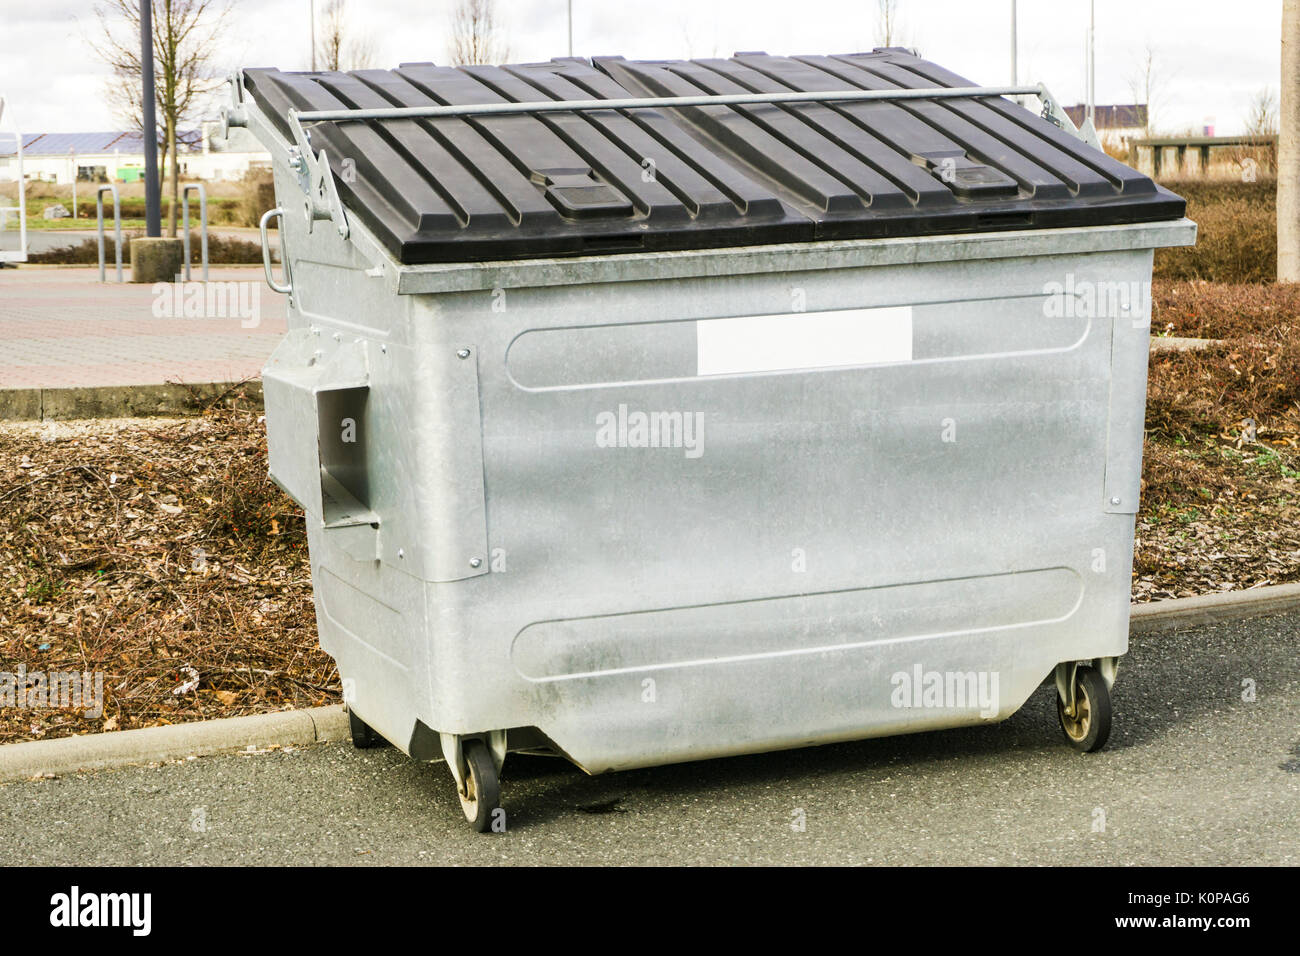 https://c8.alamy.com/comp/K0PAG6/big-garbage-container-on-street-K0PAG6.jpg